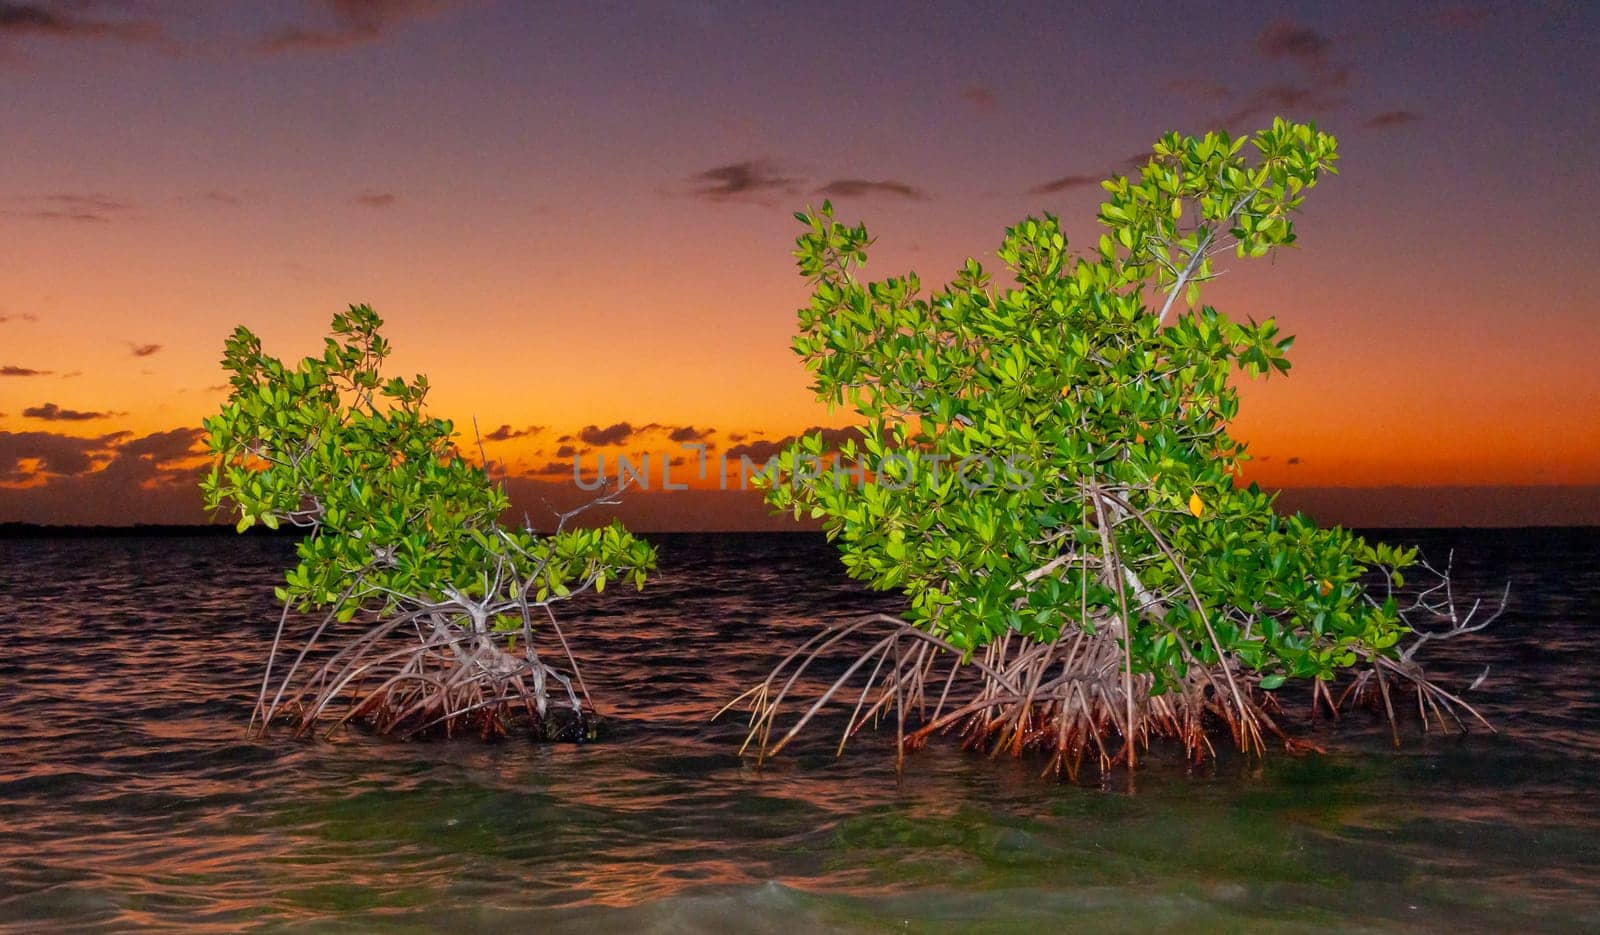 Coastal thickets. Mangroves at low tide in the Gulf of Mexico, Florida, USA.